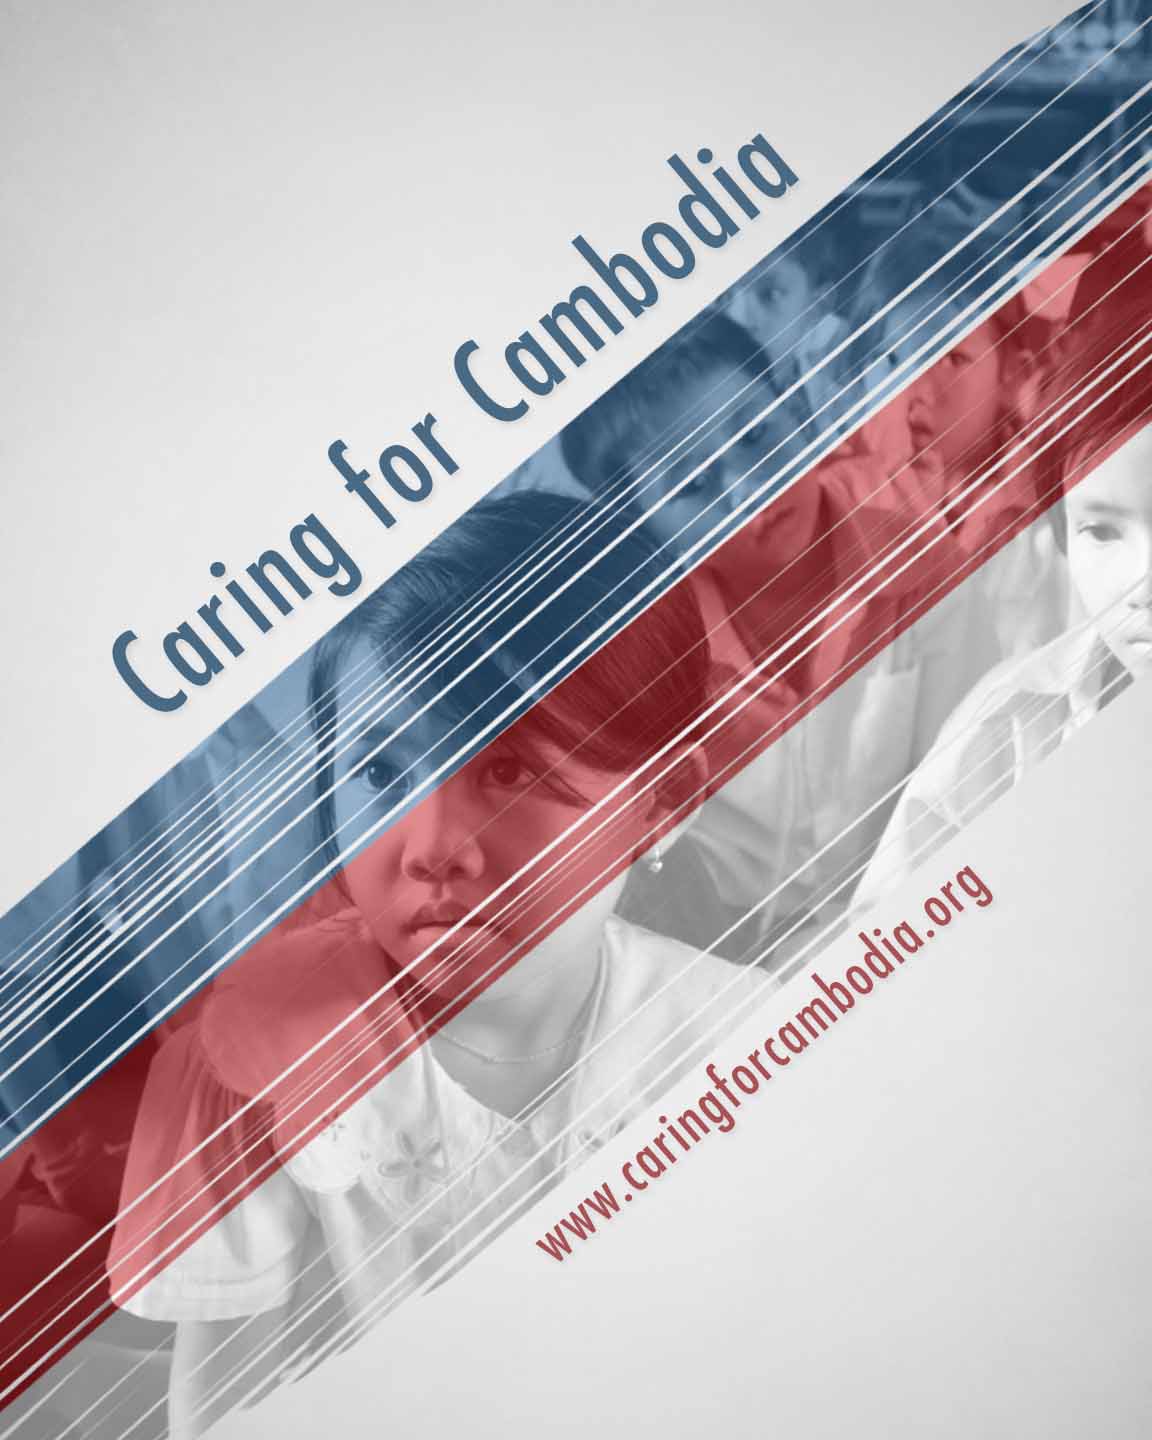 Caring for Cambodia - Movie Poster